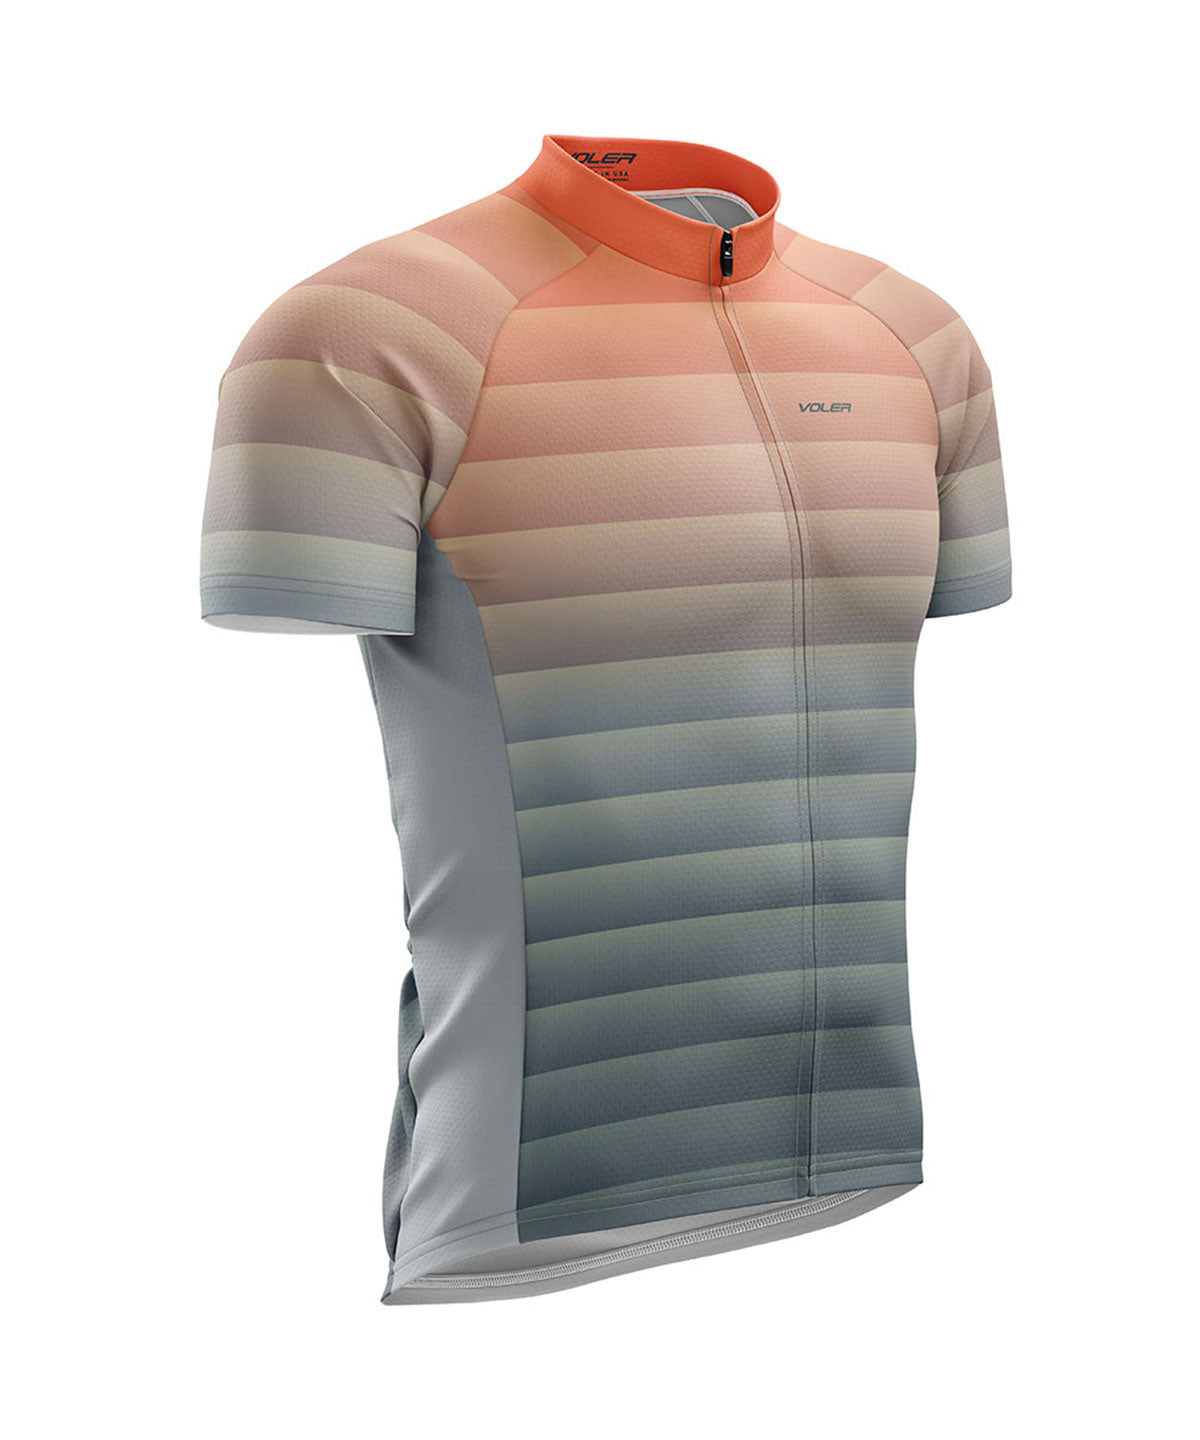 M. CLASSIC JERSEY - PACIFICO